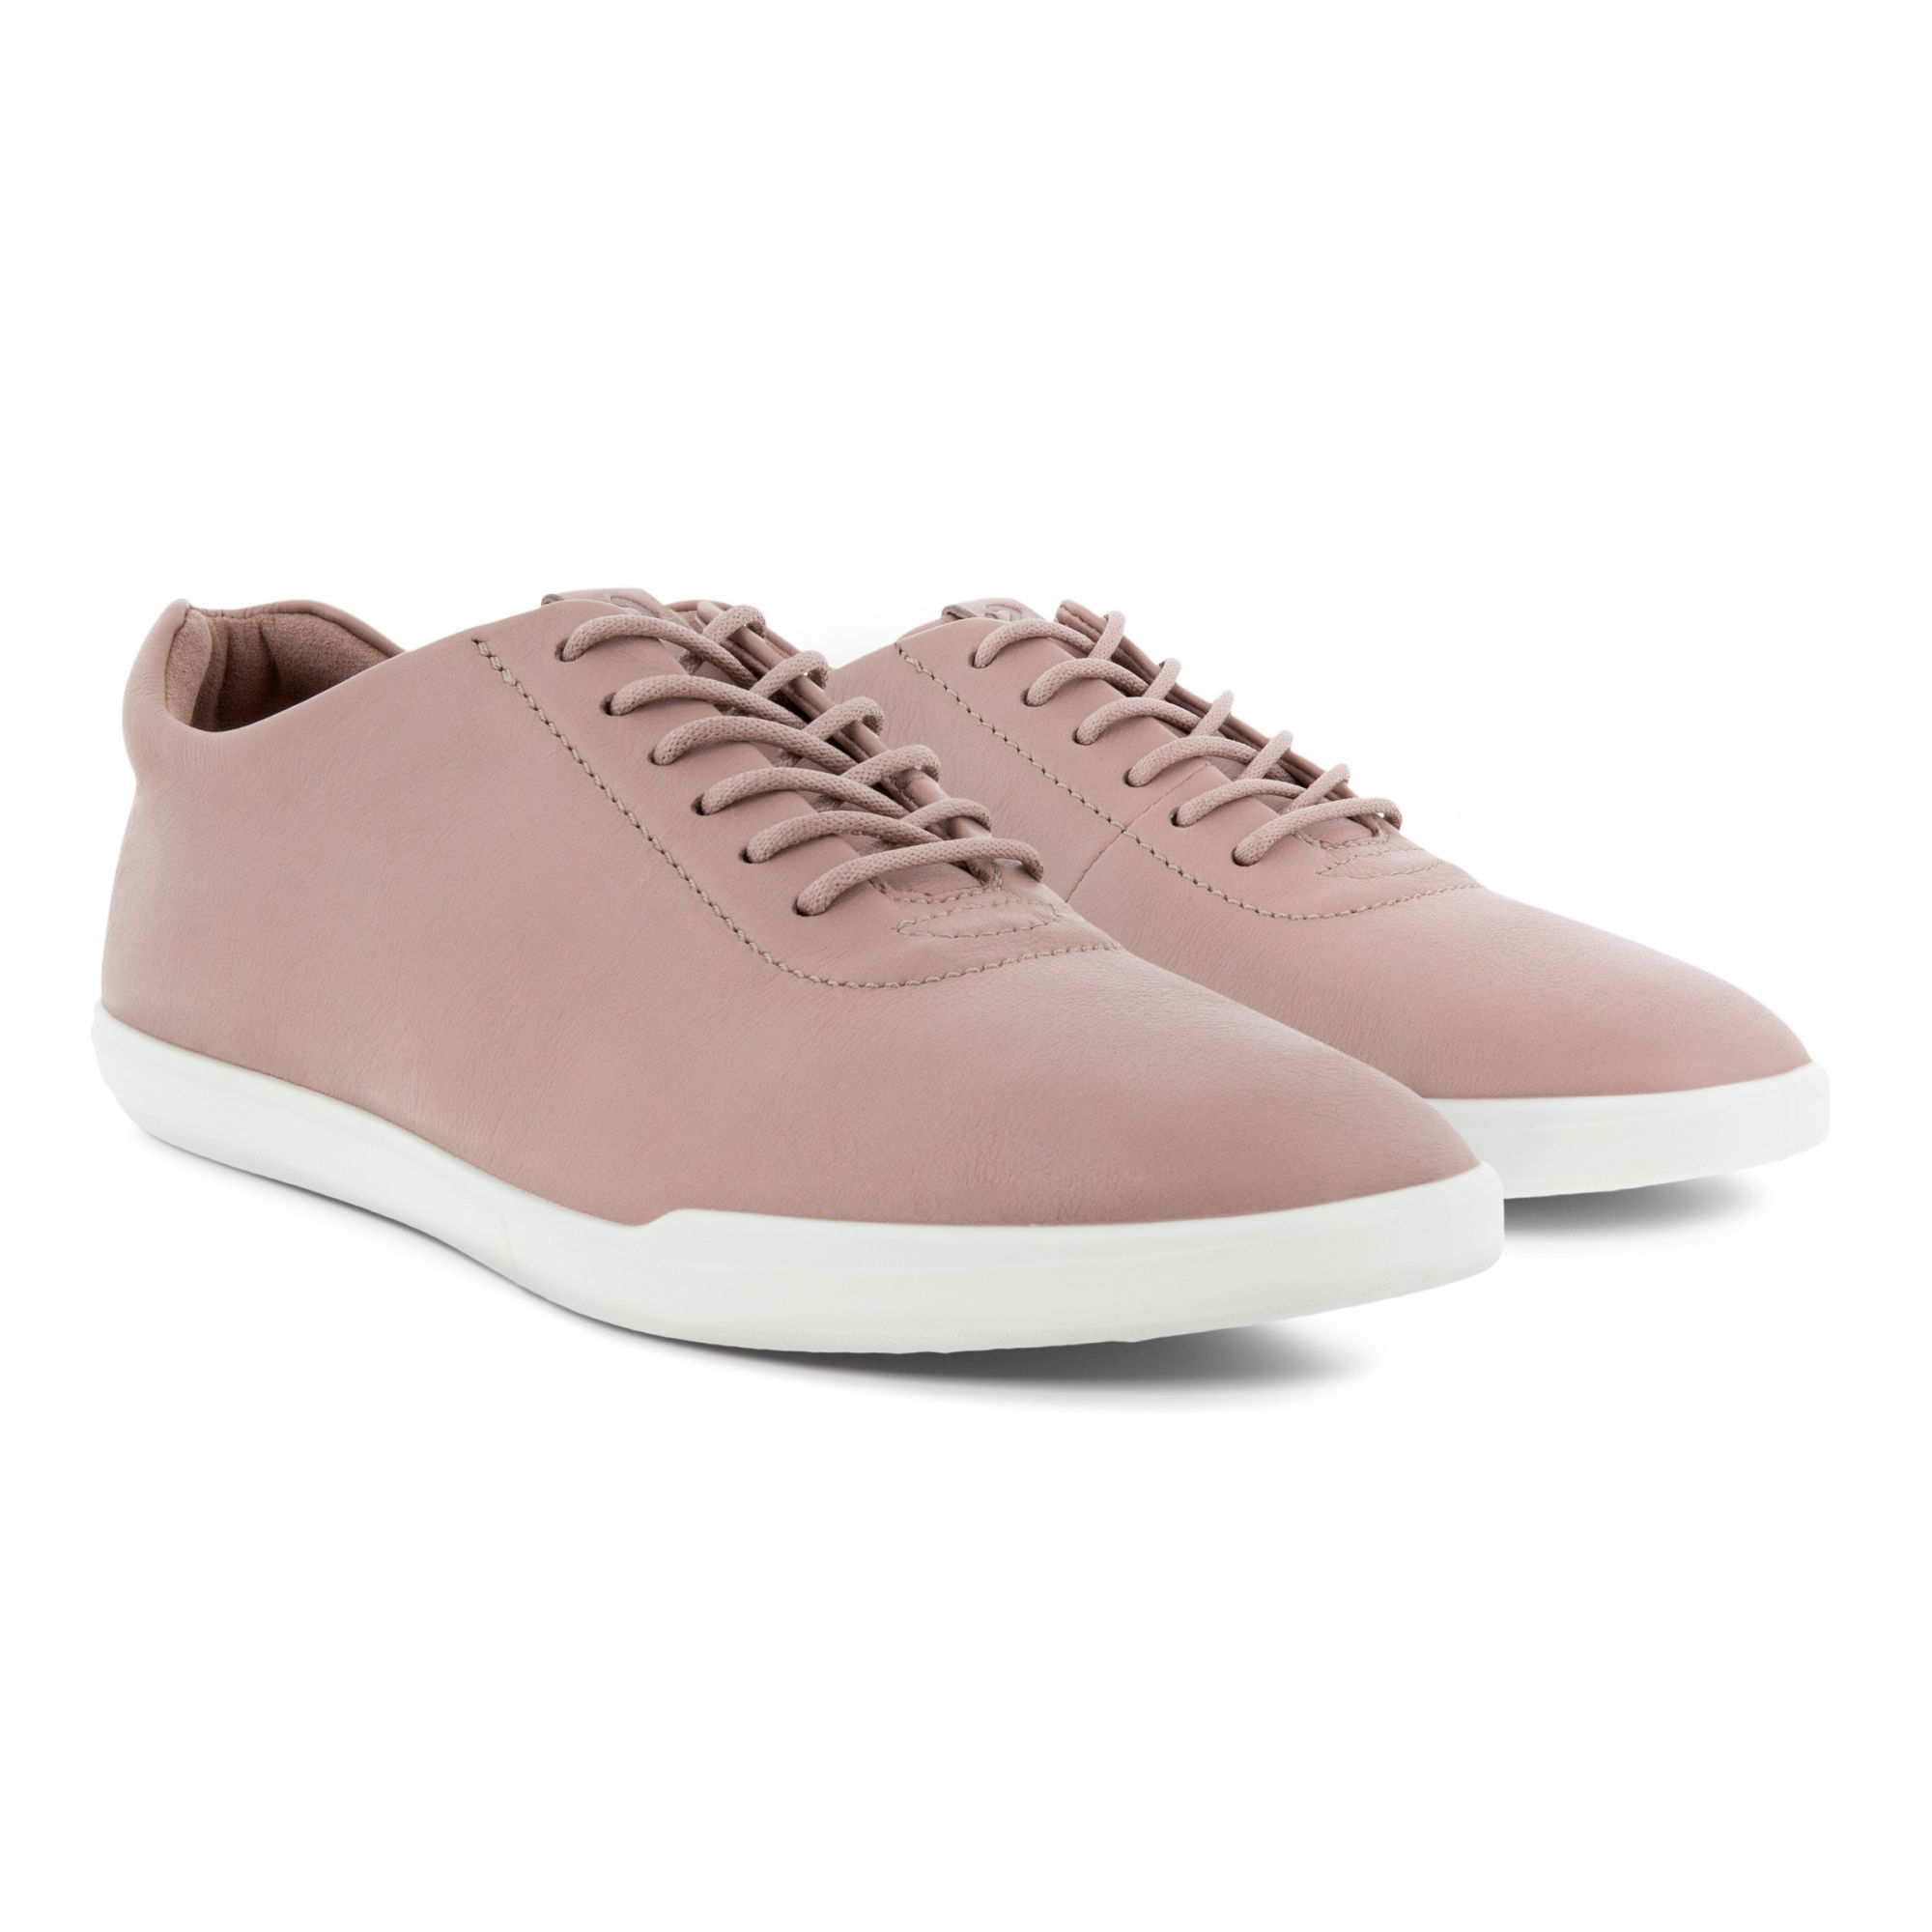 Ecco SIMPIL W Shoe 35 - Products - Veryk Mall - Veryk Mall, many